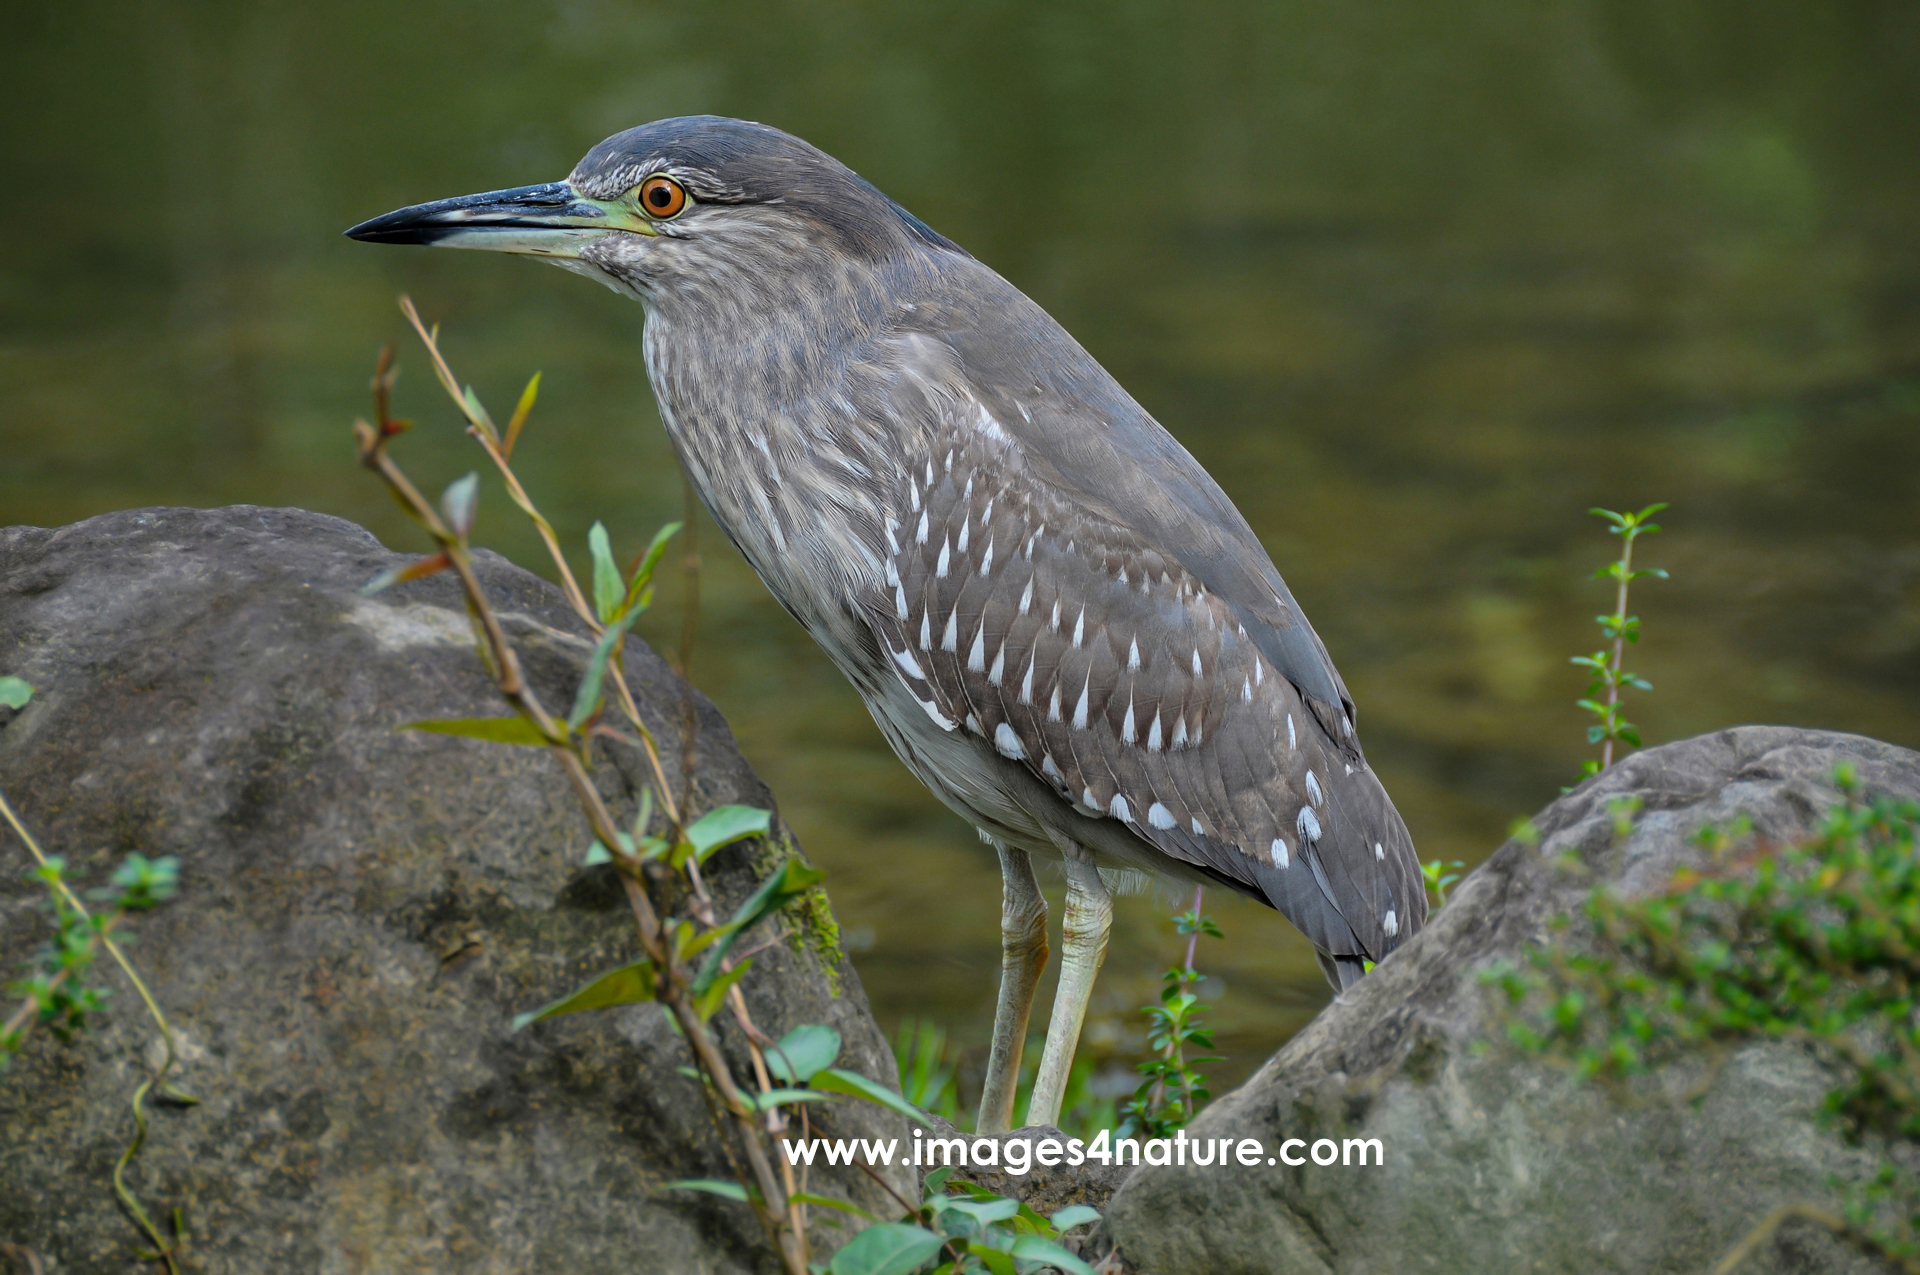 Side view of greyish bird between rocks on the edge of a pond